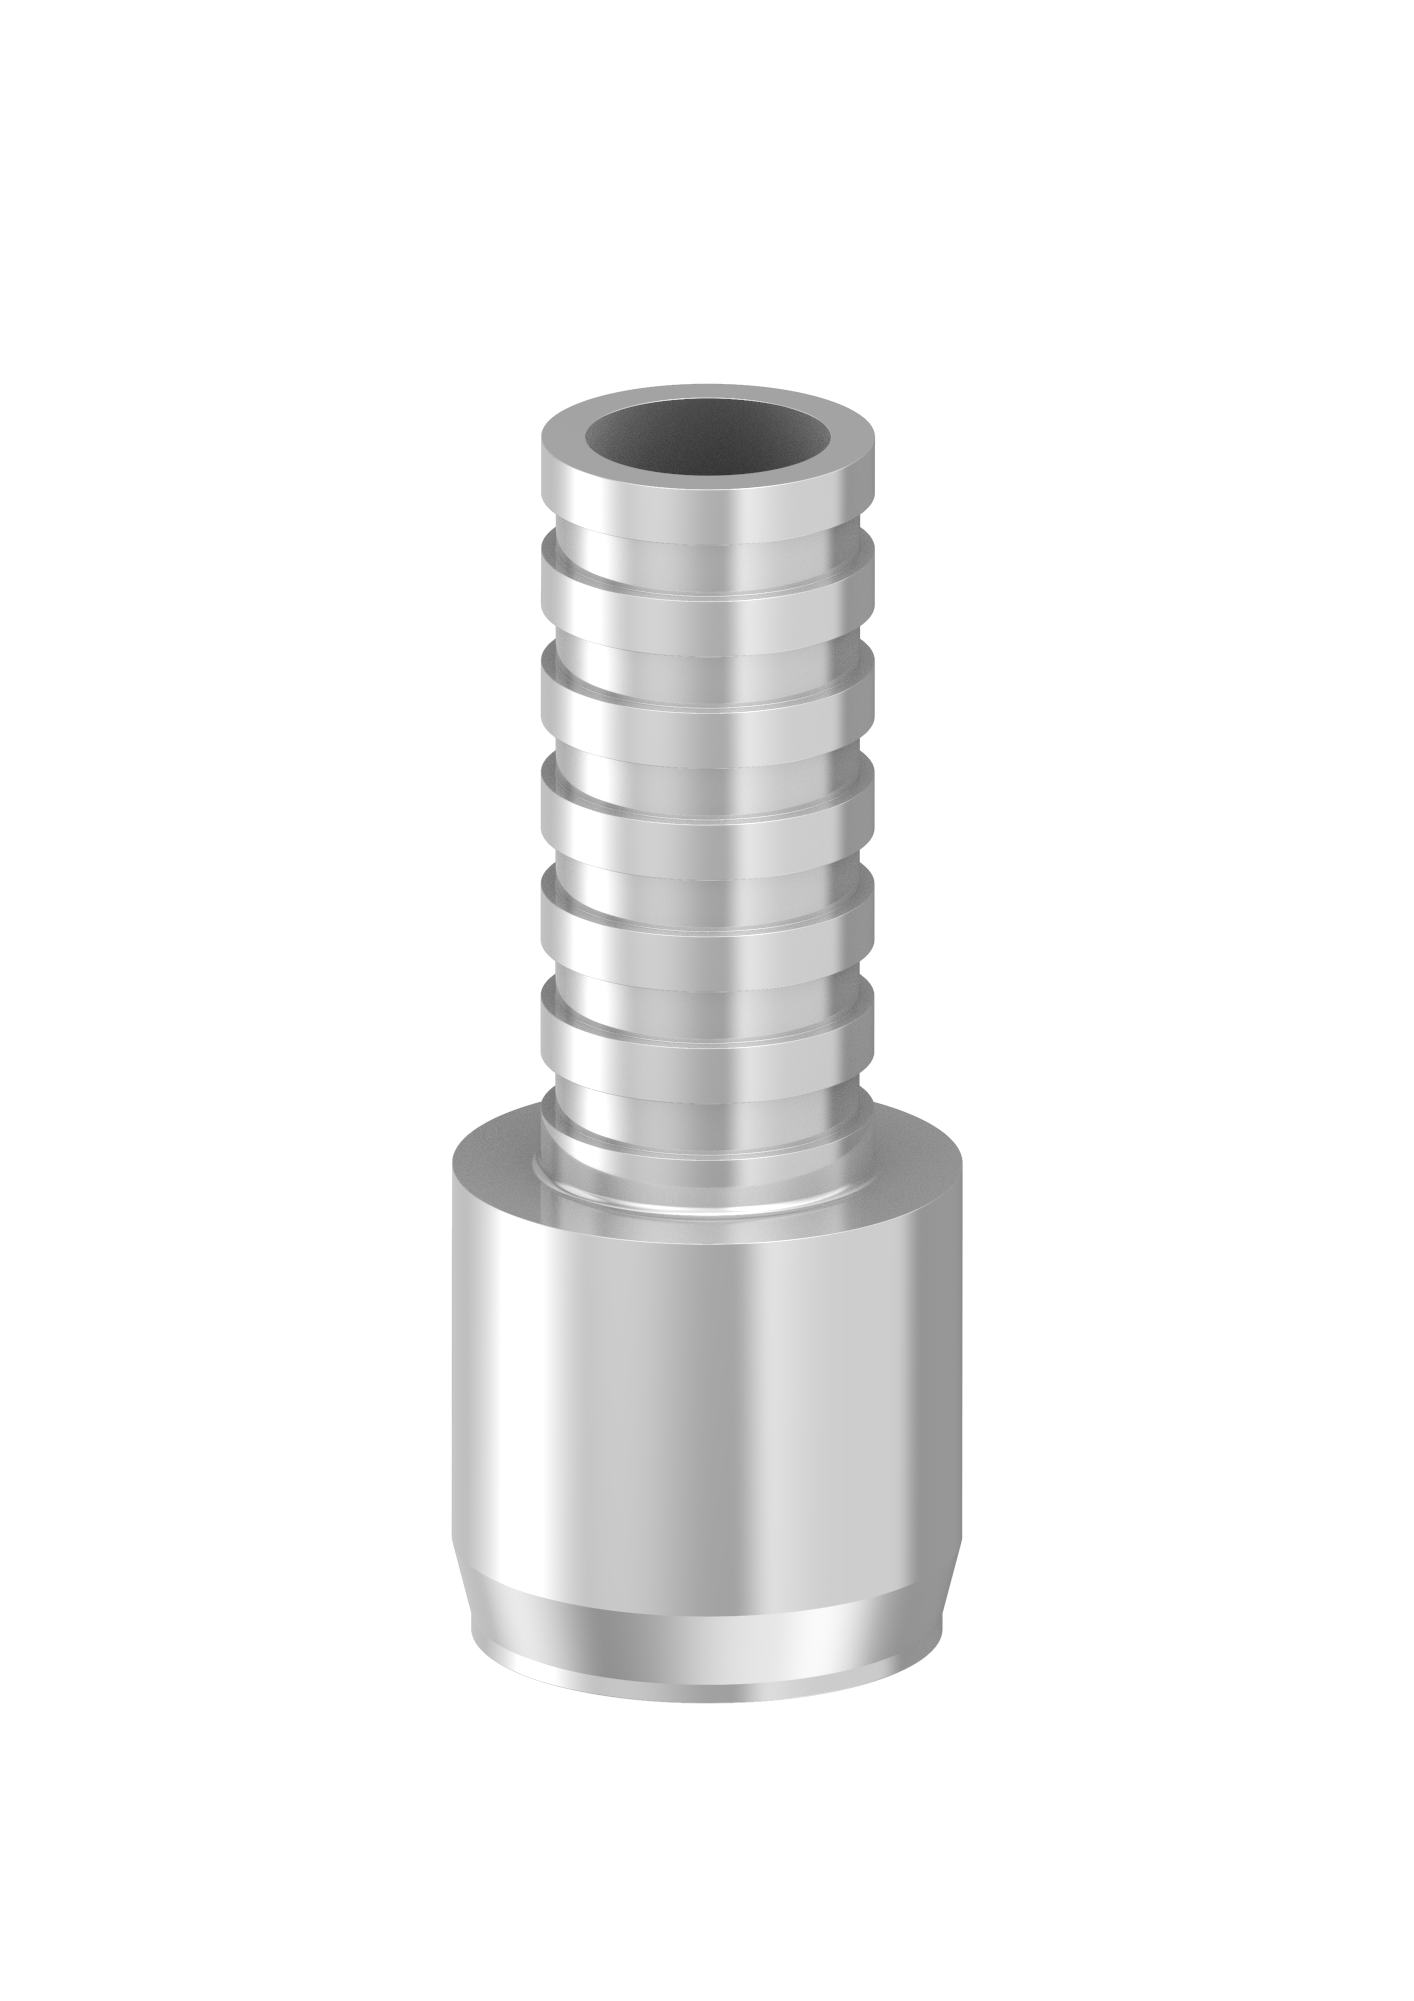 Titanium Cylinder Compact Conical 5mm